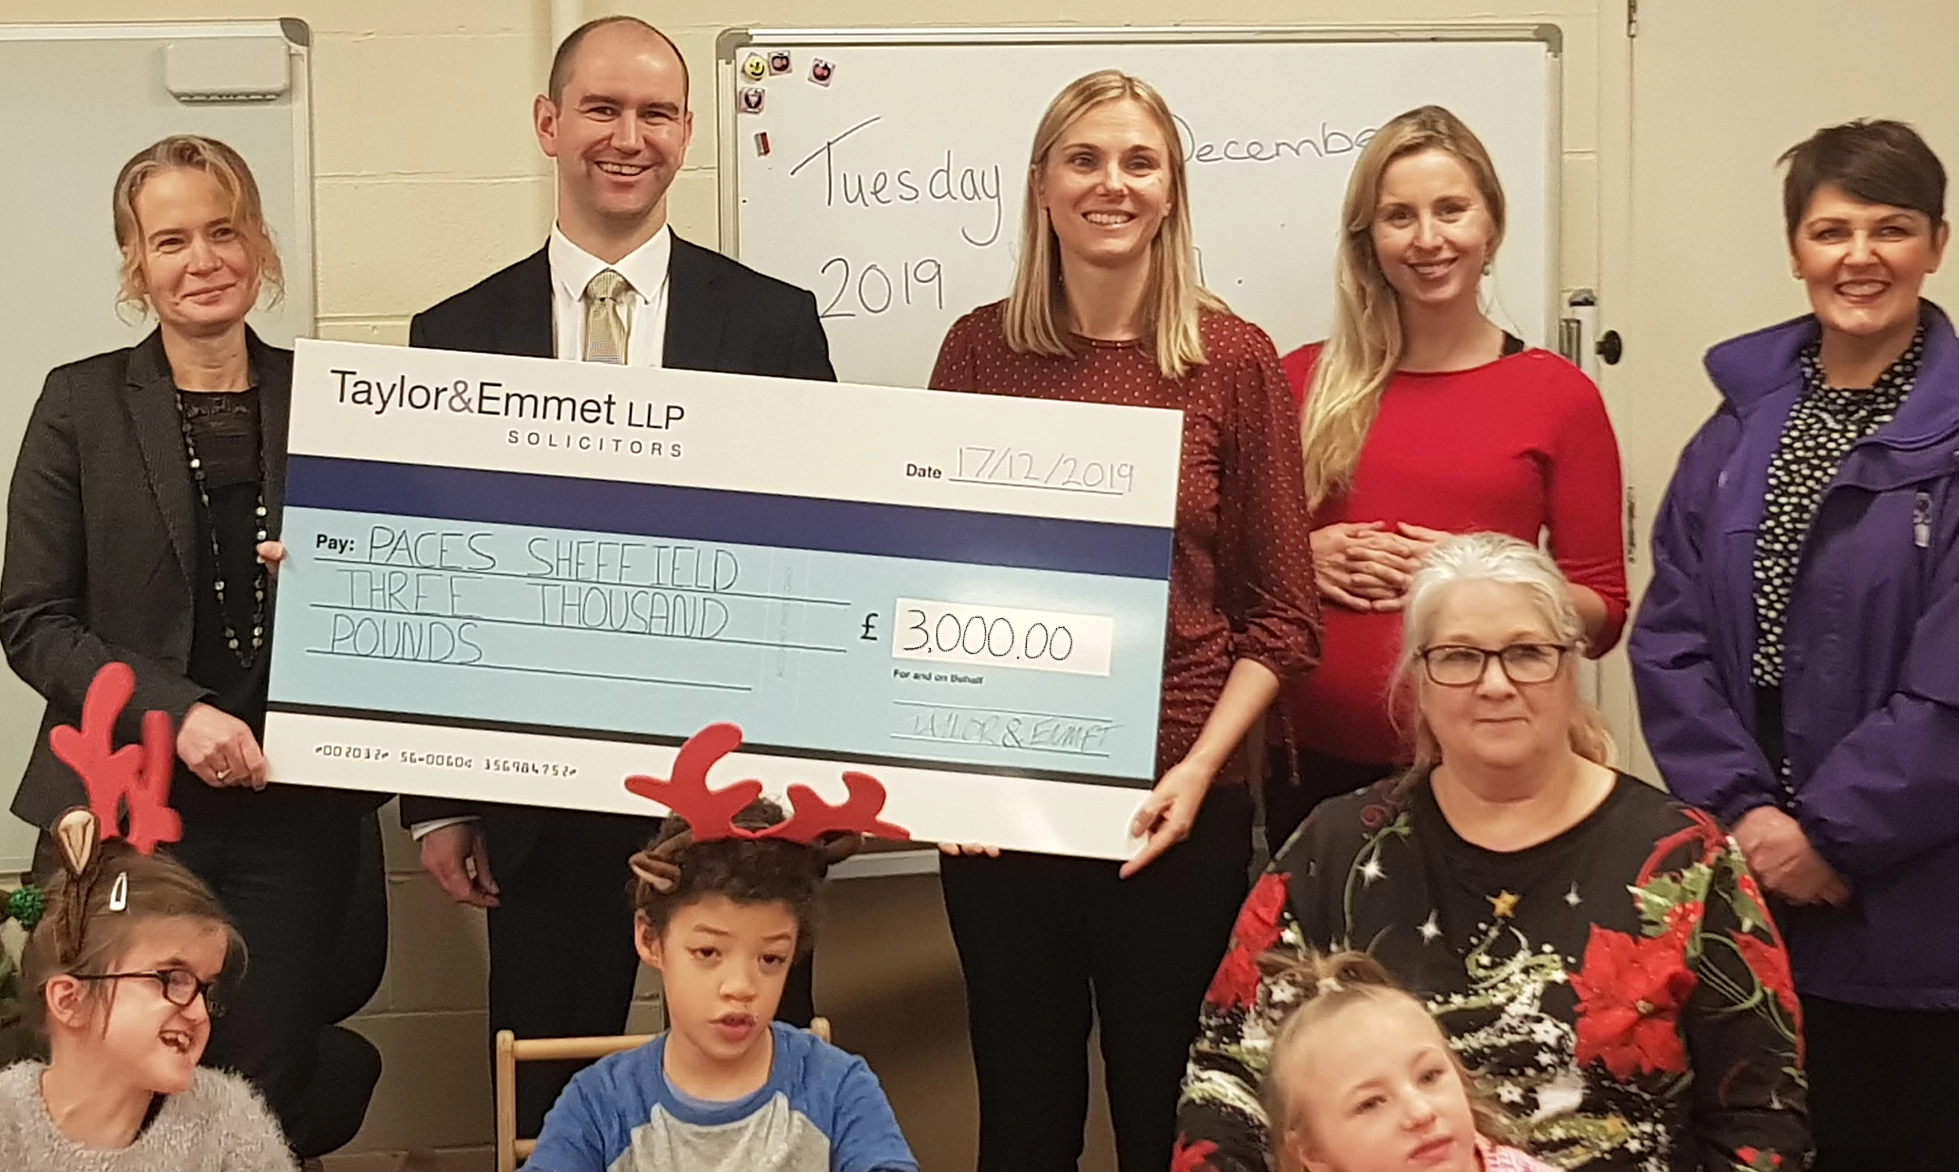 Paces headteacher, Ruth Liu (centre) and external relations officer, Vikki Mallinder (far right) accept Taylor&Emmet's donation from (left to right) Lucy Rodgers, Paul Fouad and Corrina Lincoln. 